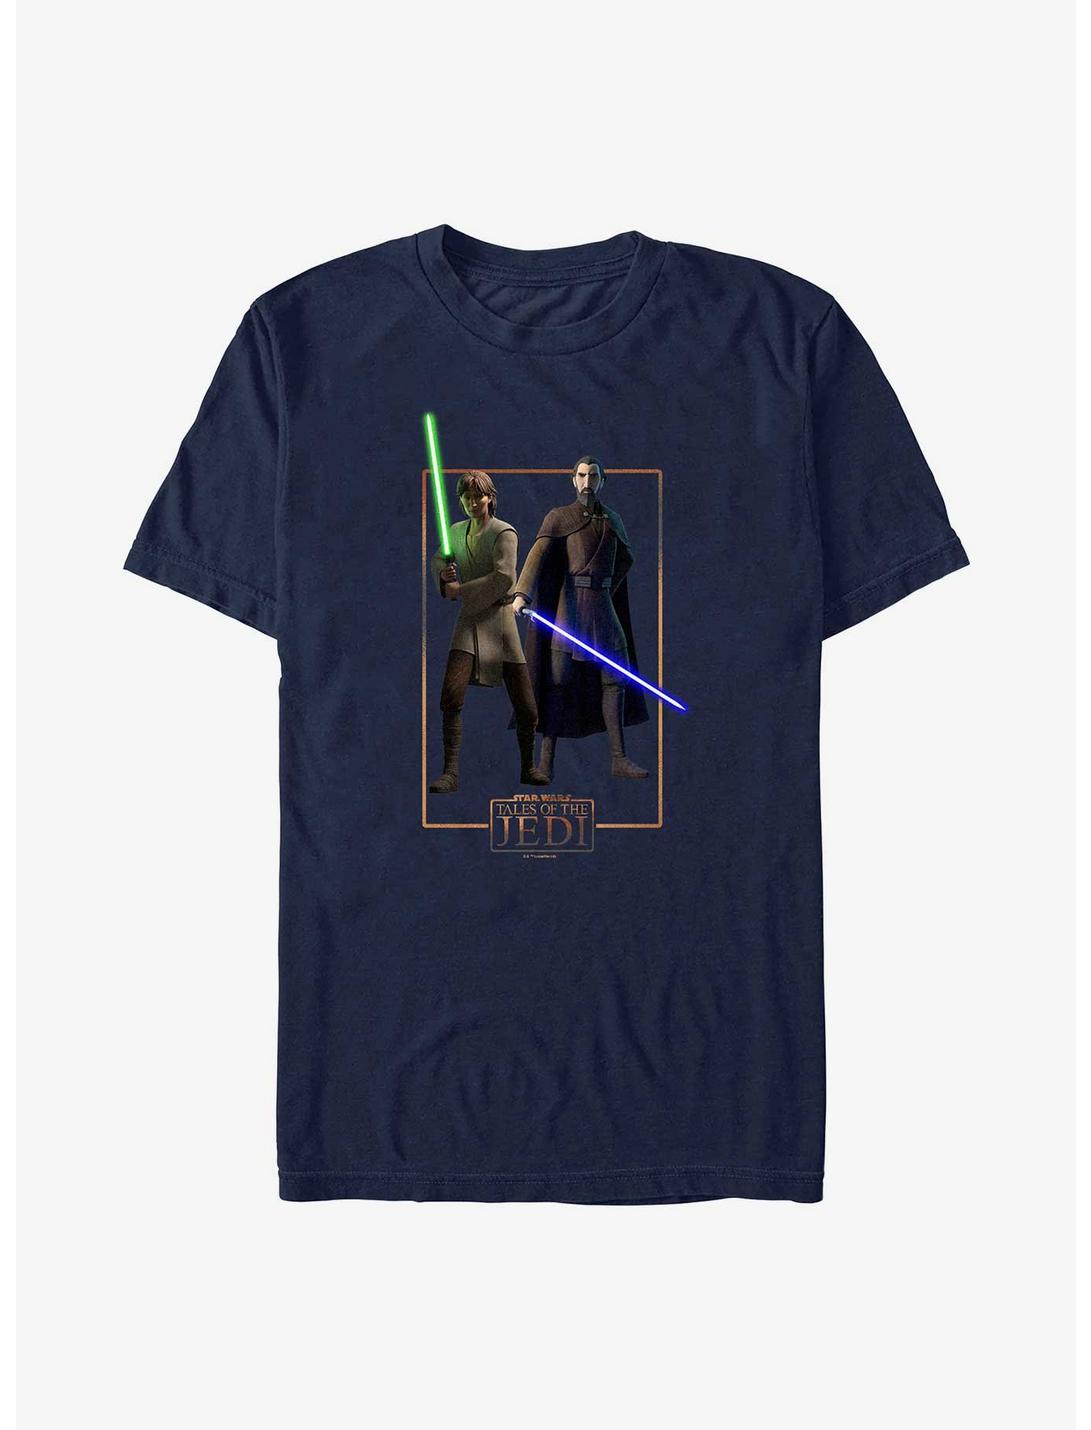 Star Wars: Tales of the Jedi Count Dooku and Qui-Gon Jinn T-Shirt, NAVY, hi-res